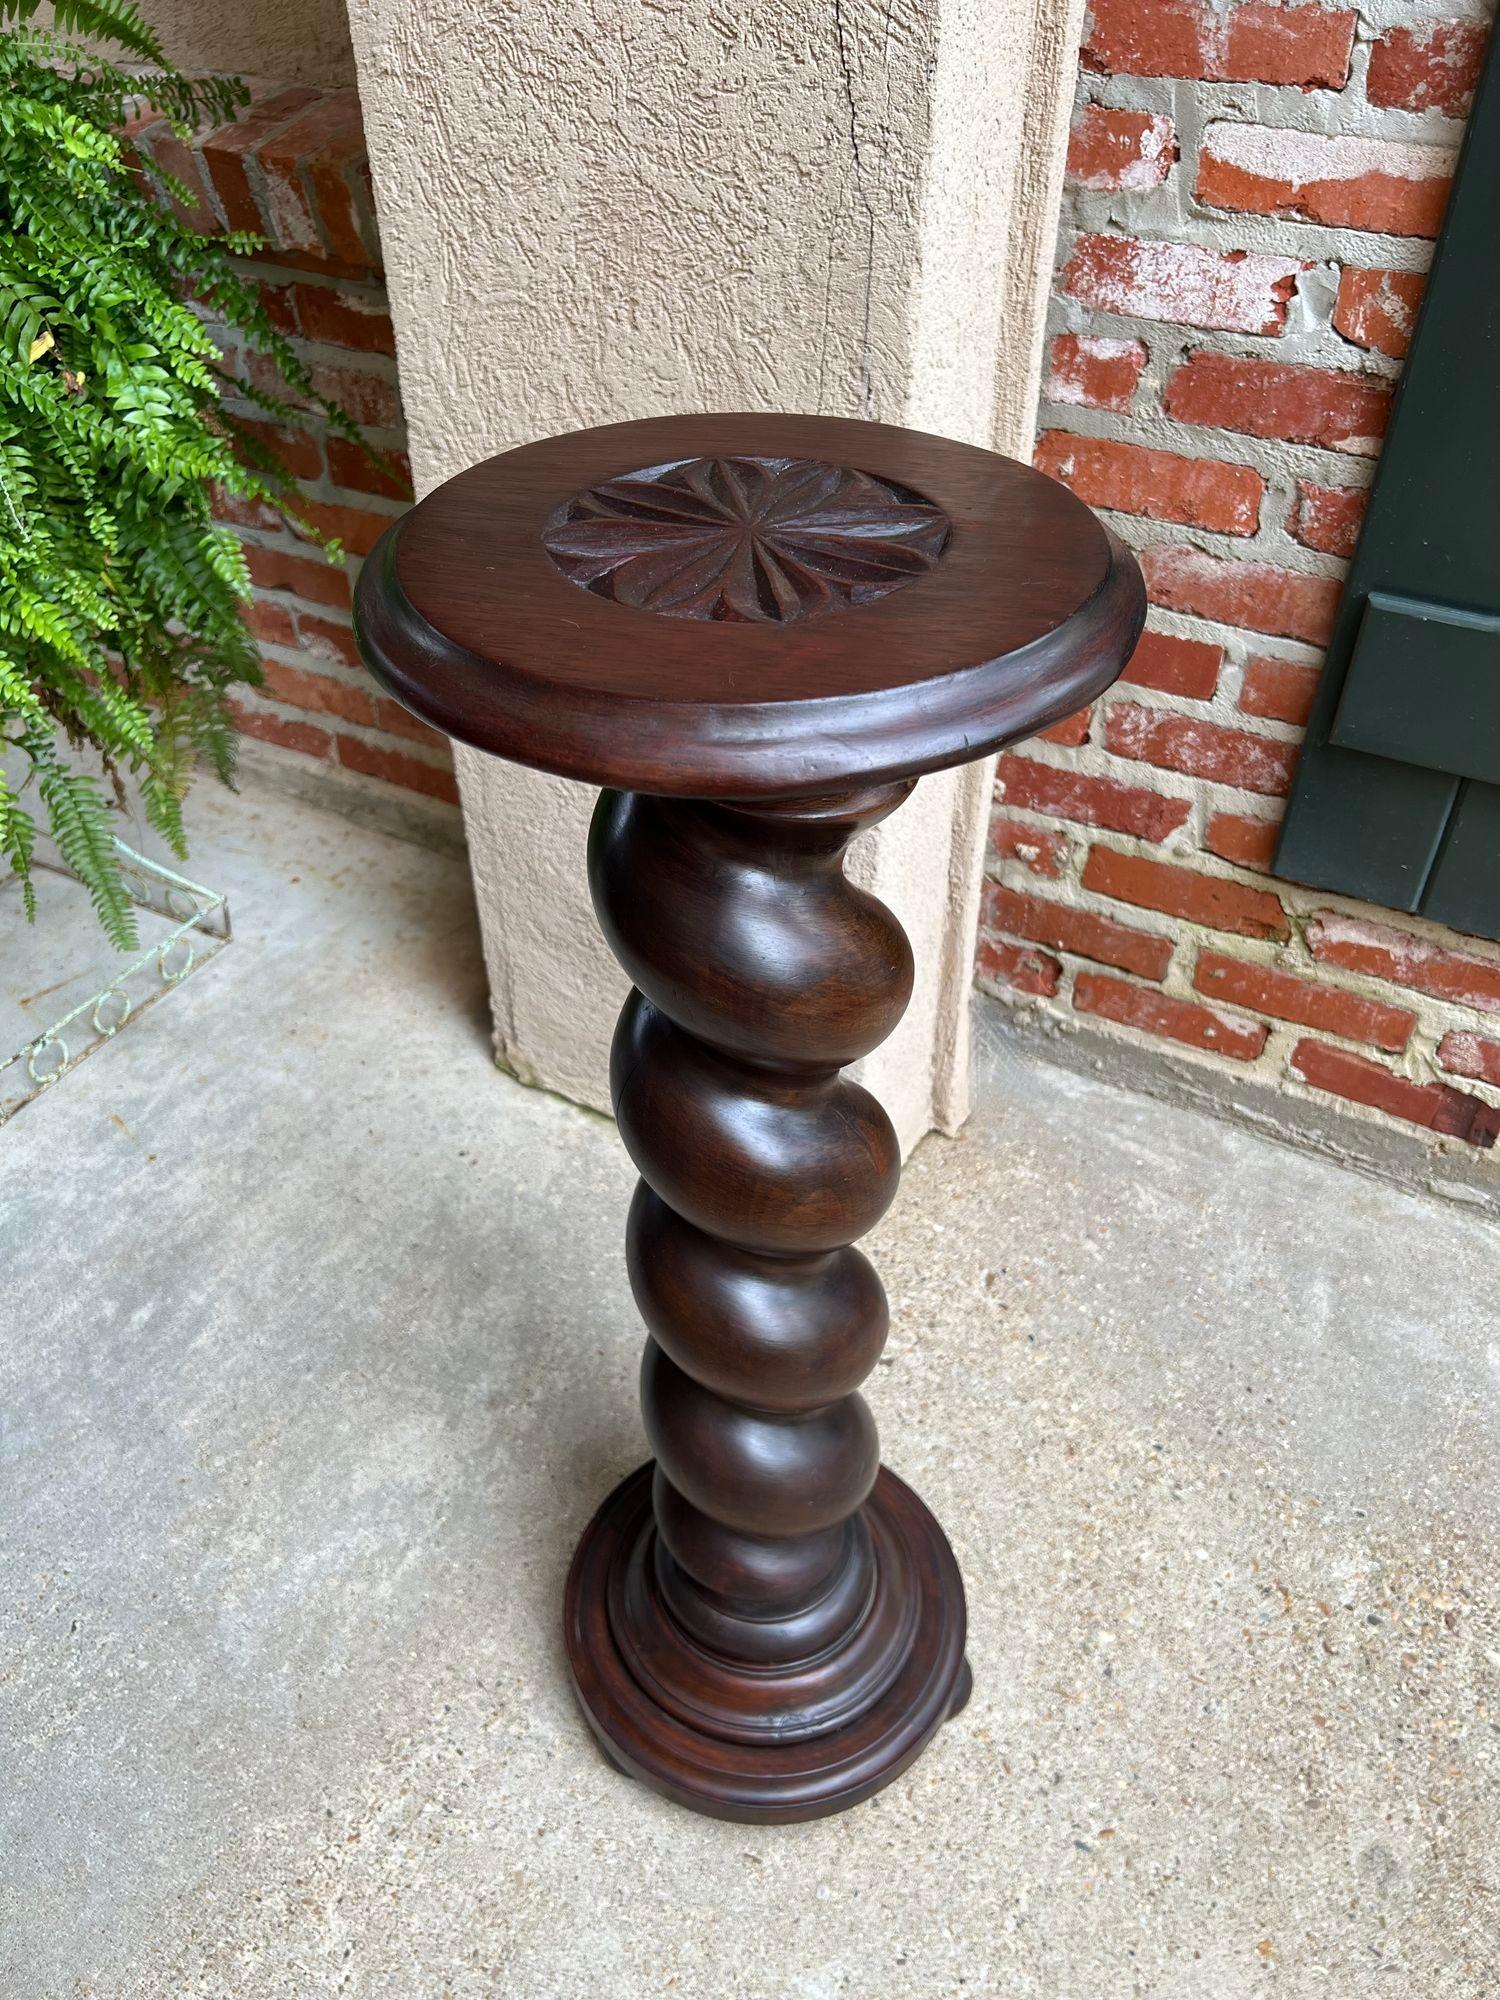 French Provincial Antique French Pedestal Stand Barley Twist Carved Oak Round Plant Display Column